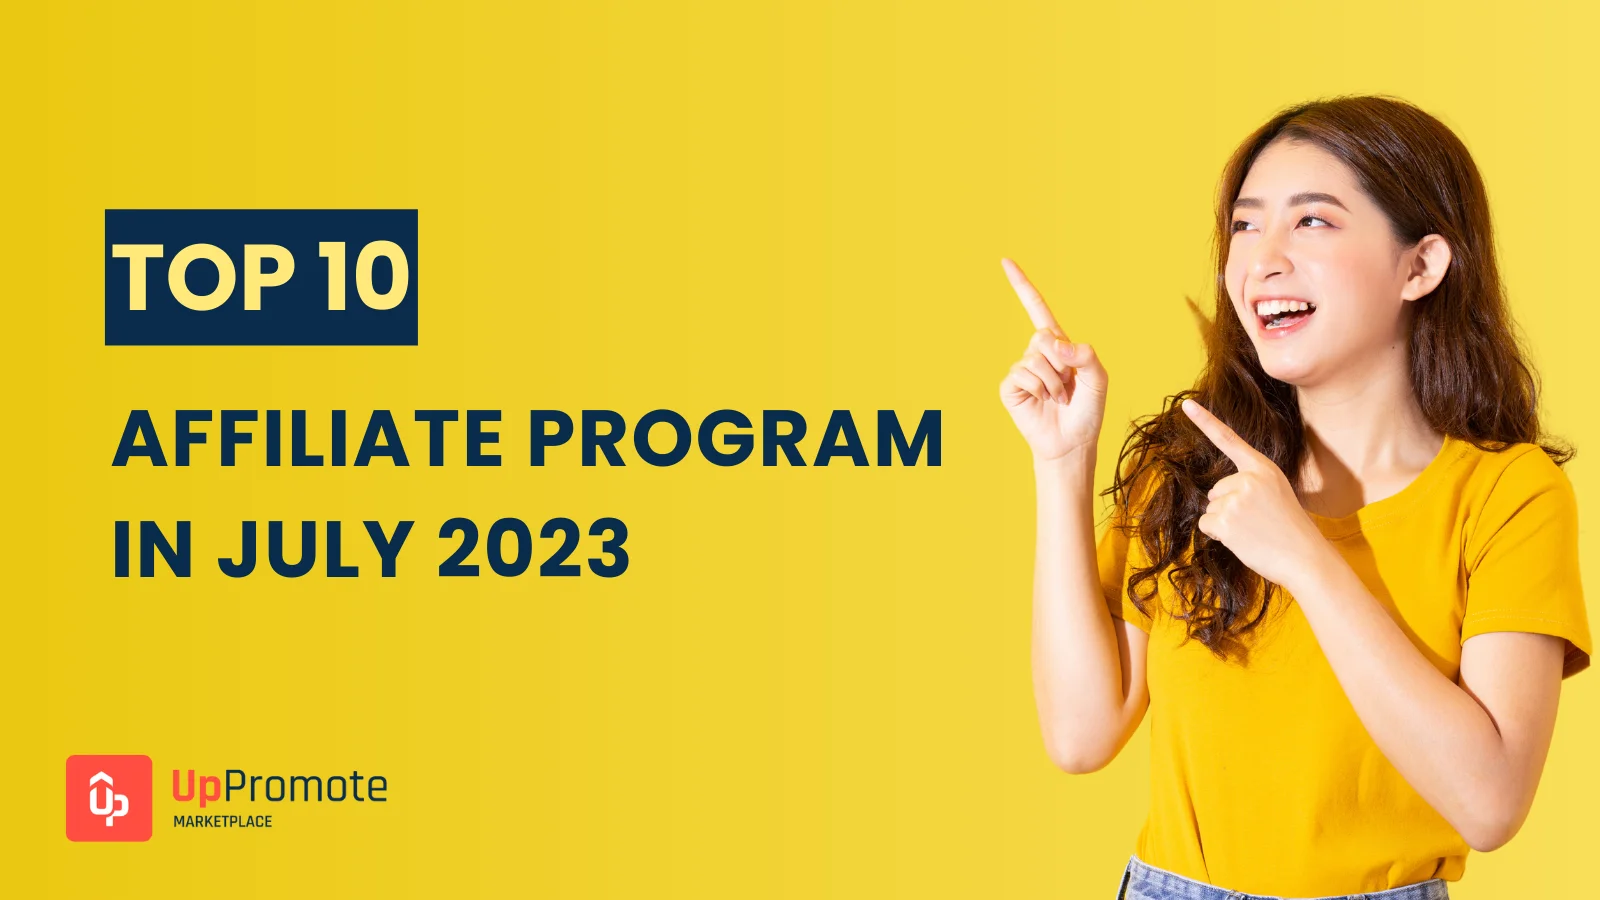 Top 10 affiliate program in July 2023 UpPromote marketplace